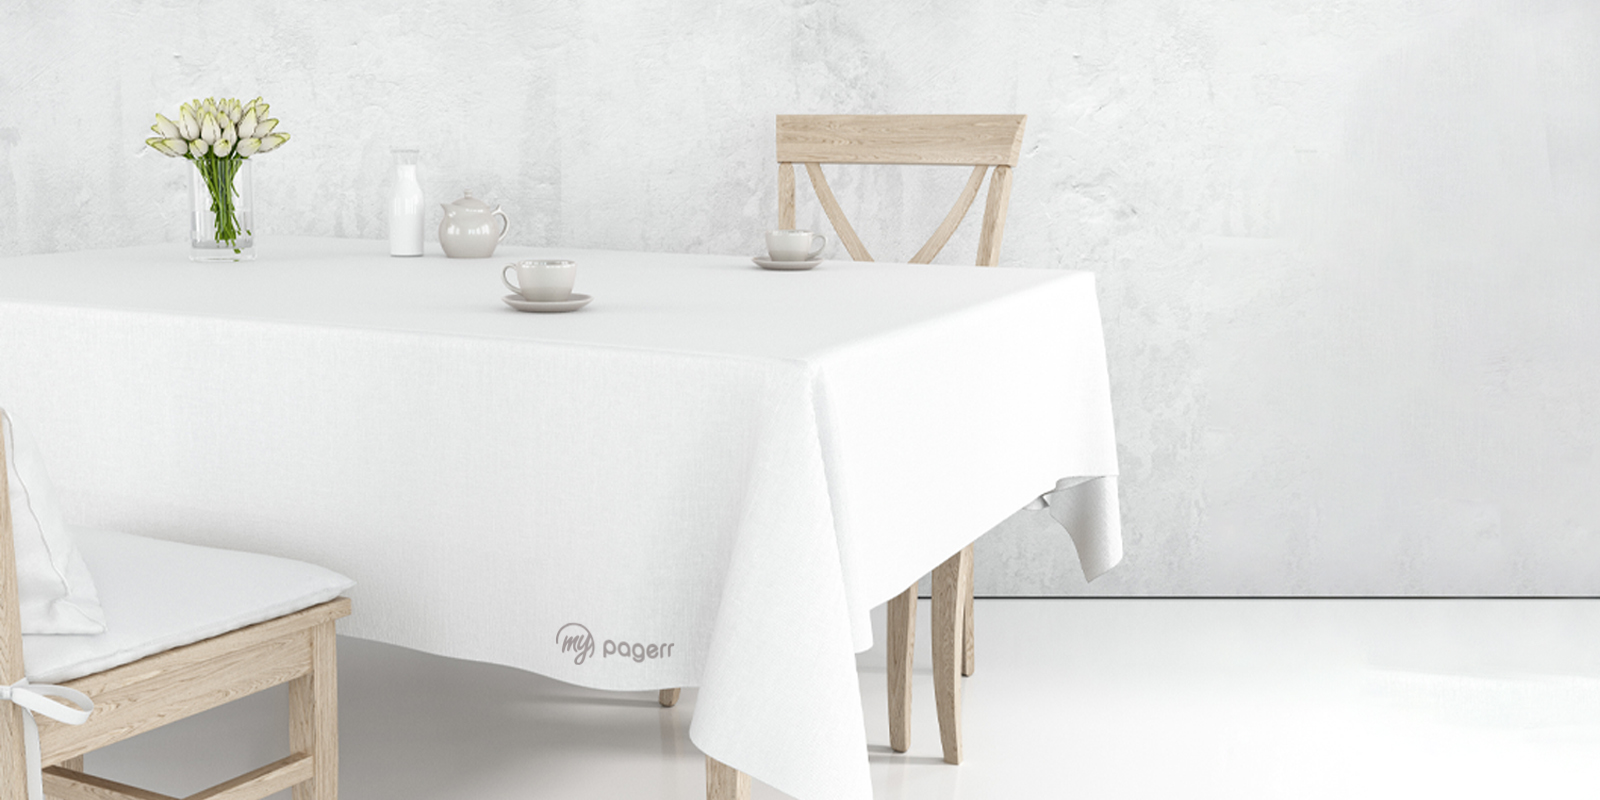 Tablecloths in Vilnius - Print with Pagerr